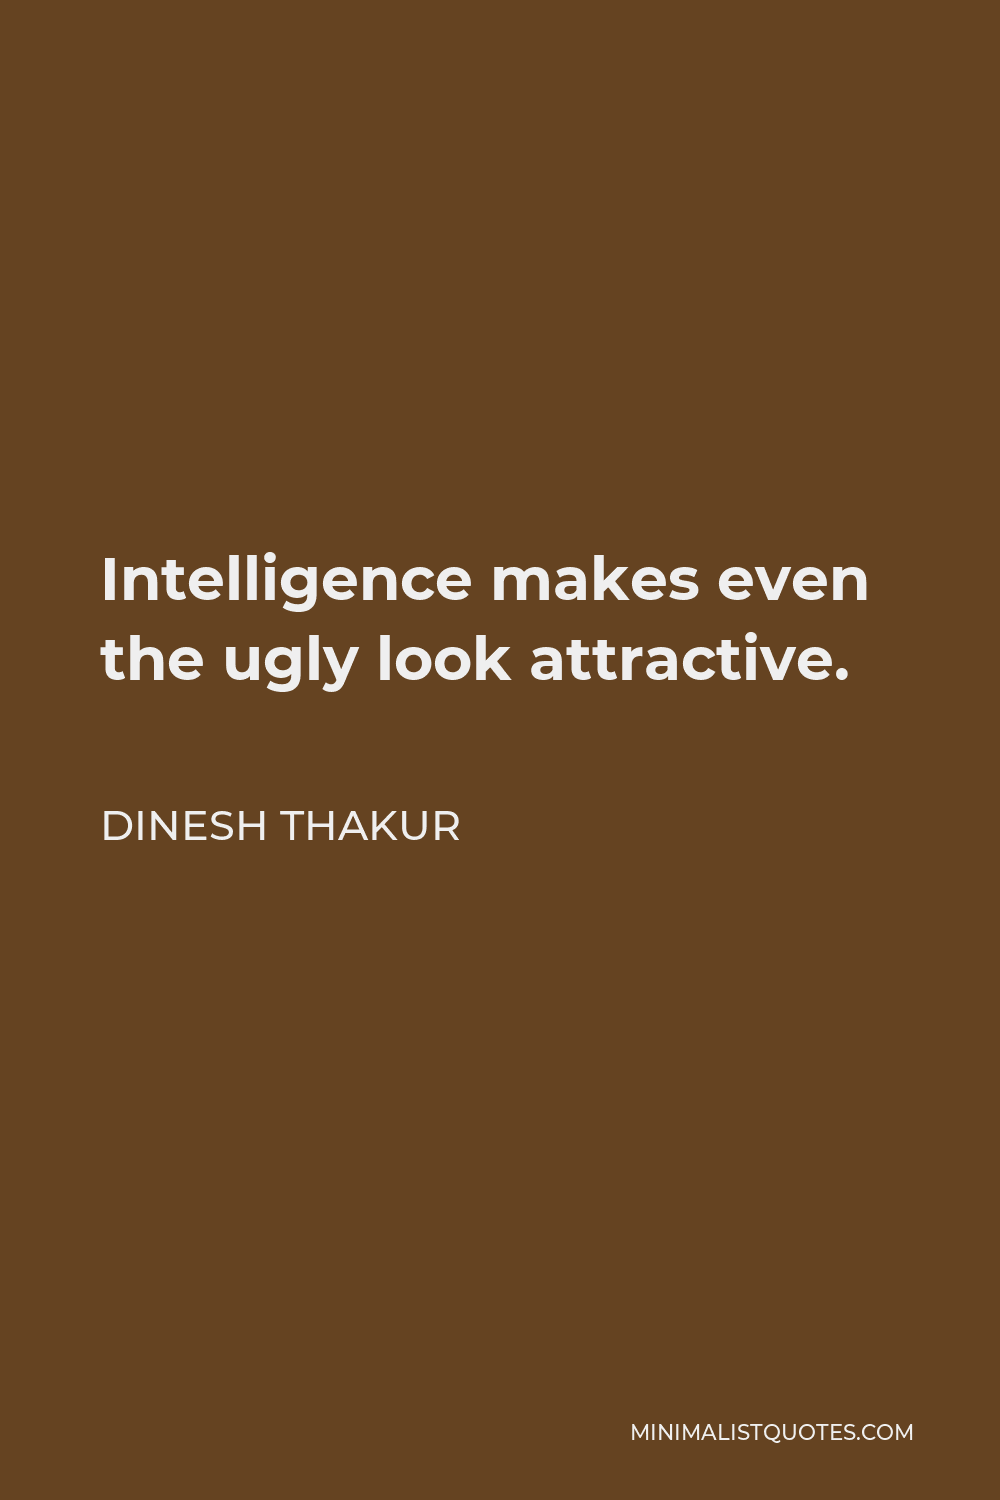 Dinesh Thakur Quote - Intelligence makes even the ugly look attractive.